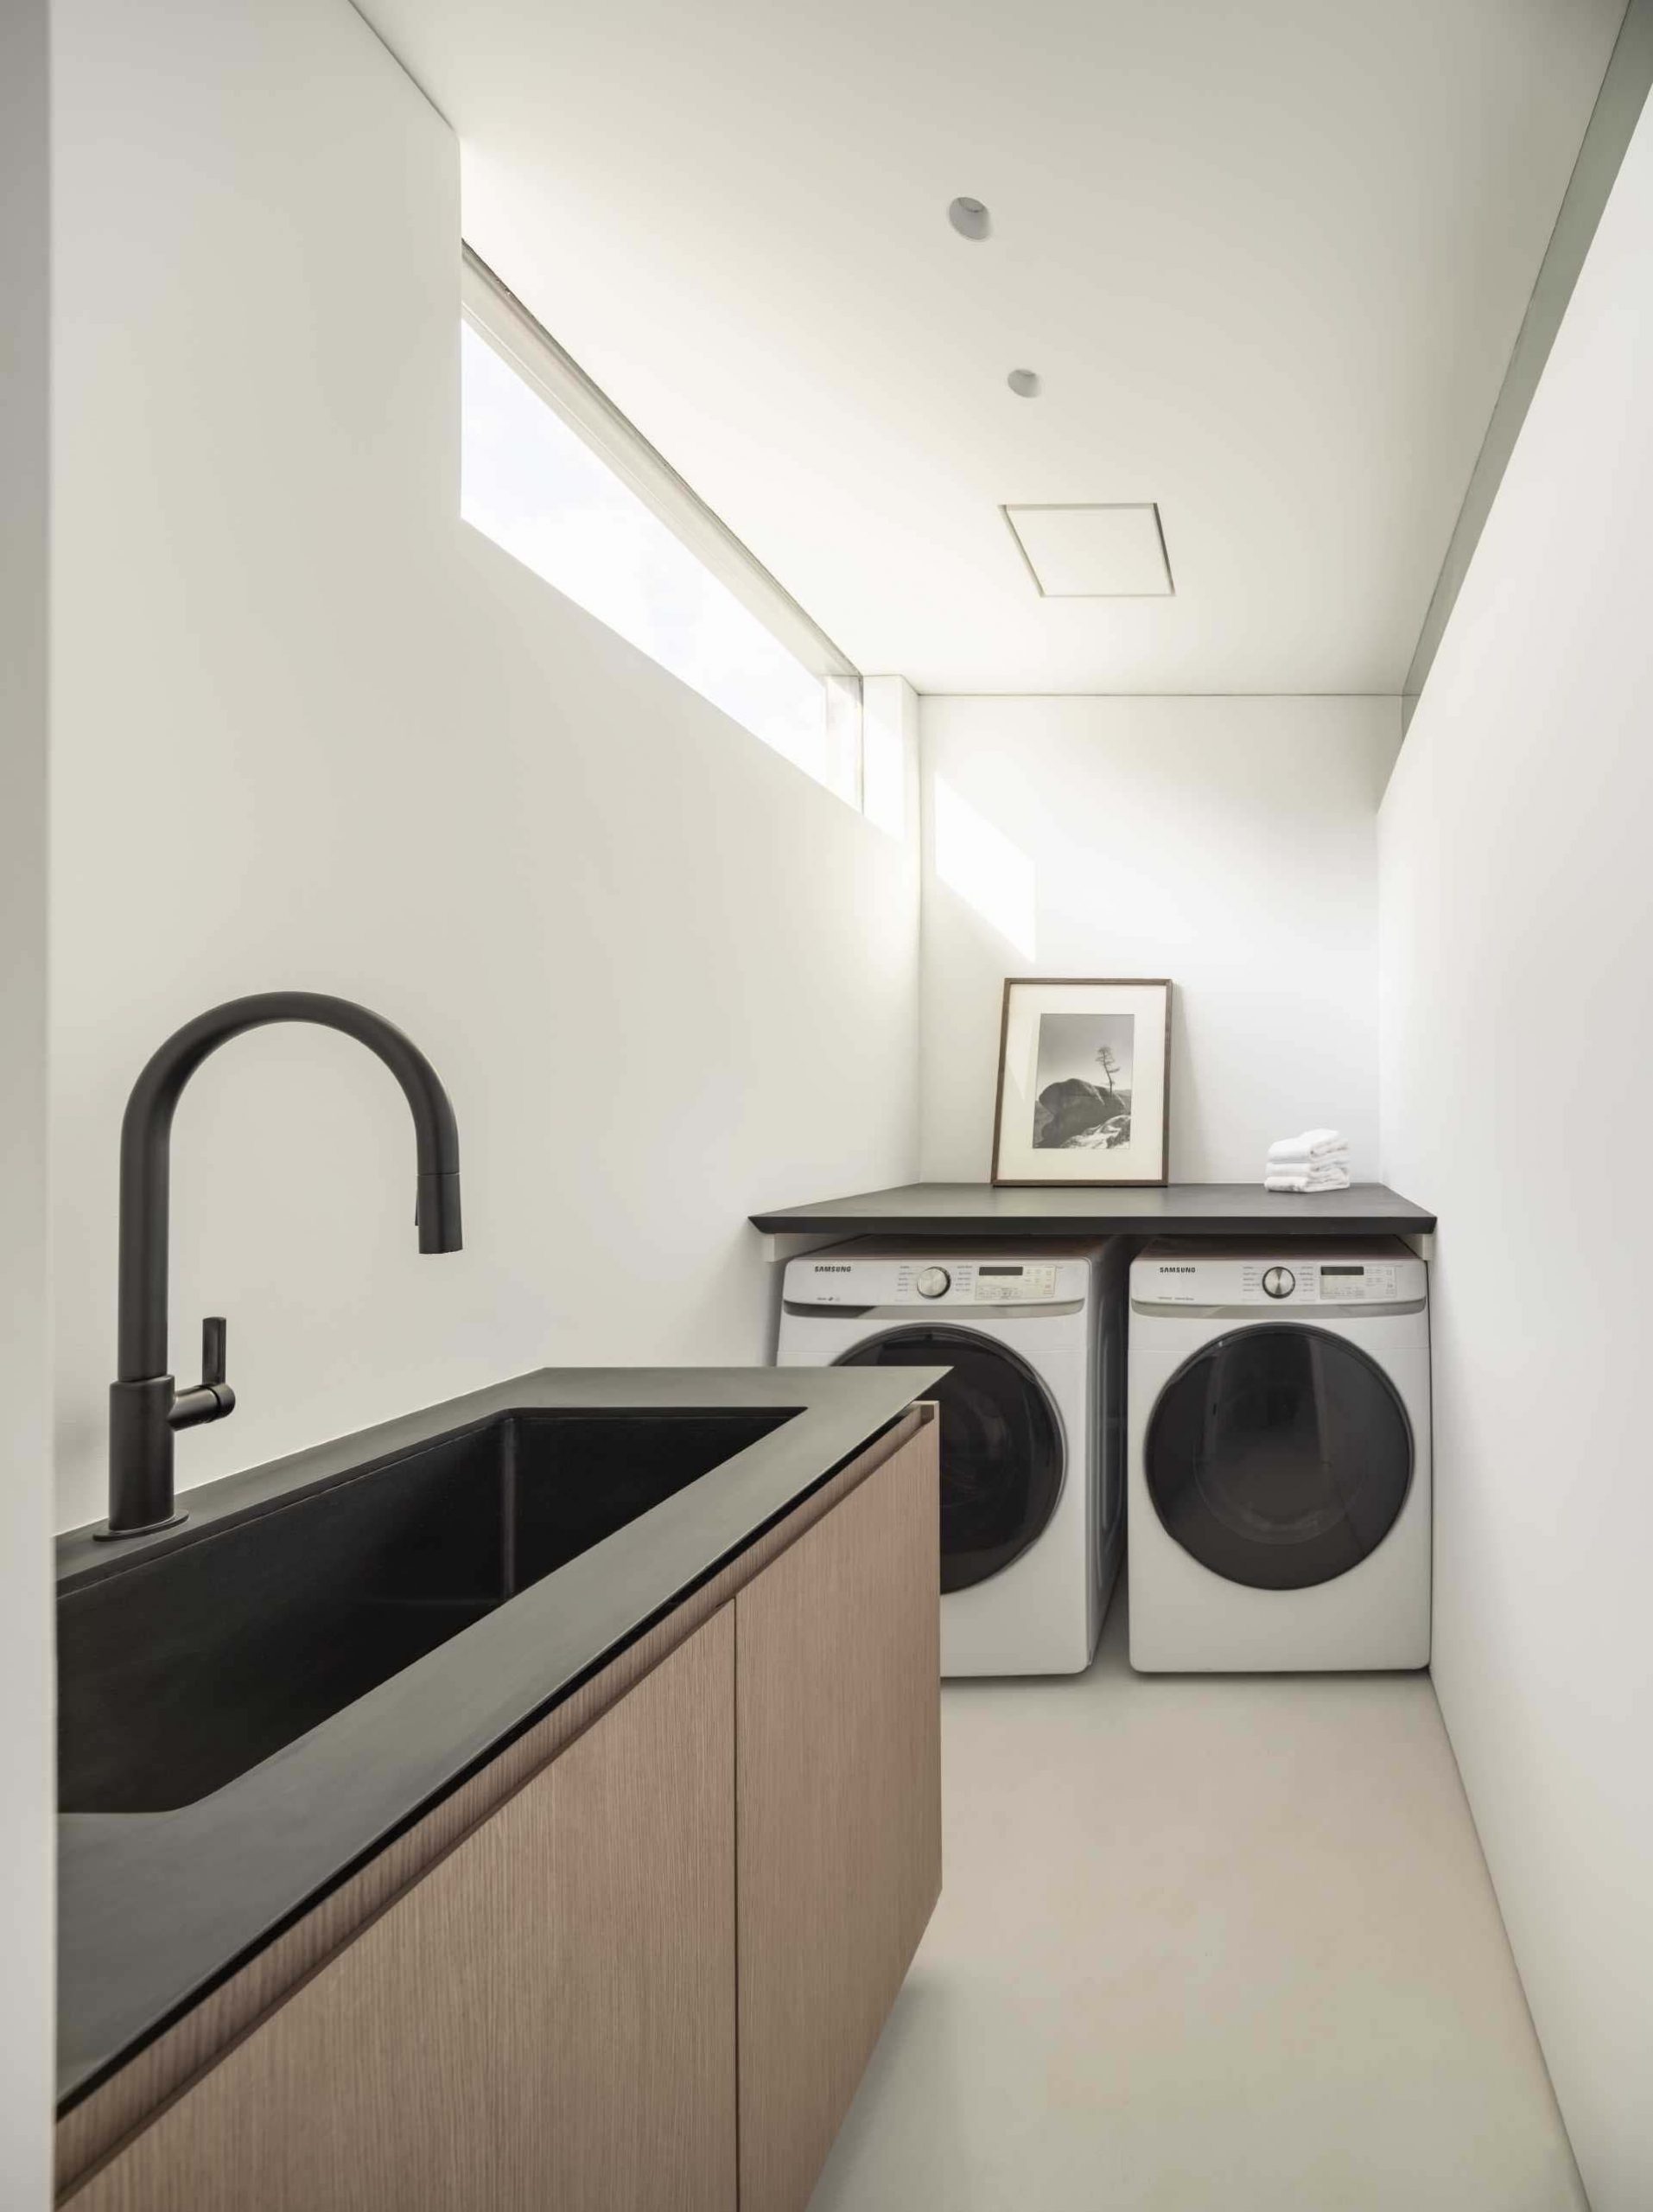 In this modern laundry room, the washing machine and dryer are positioned below a counter that adds a workbench to the space.